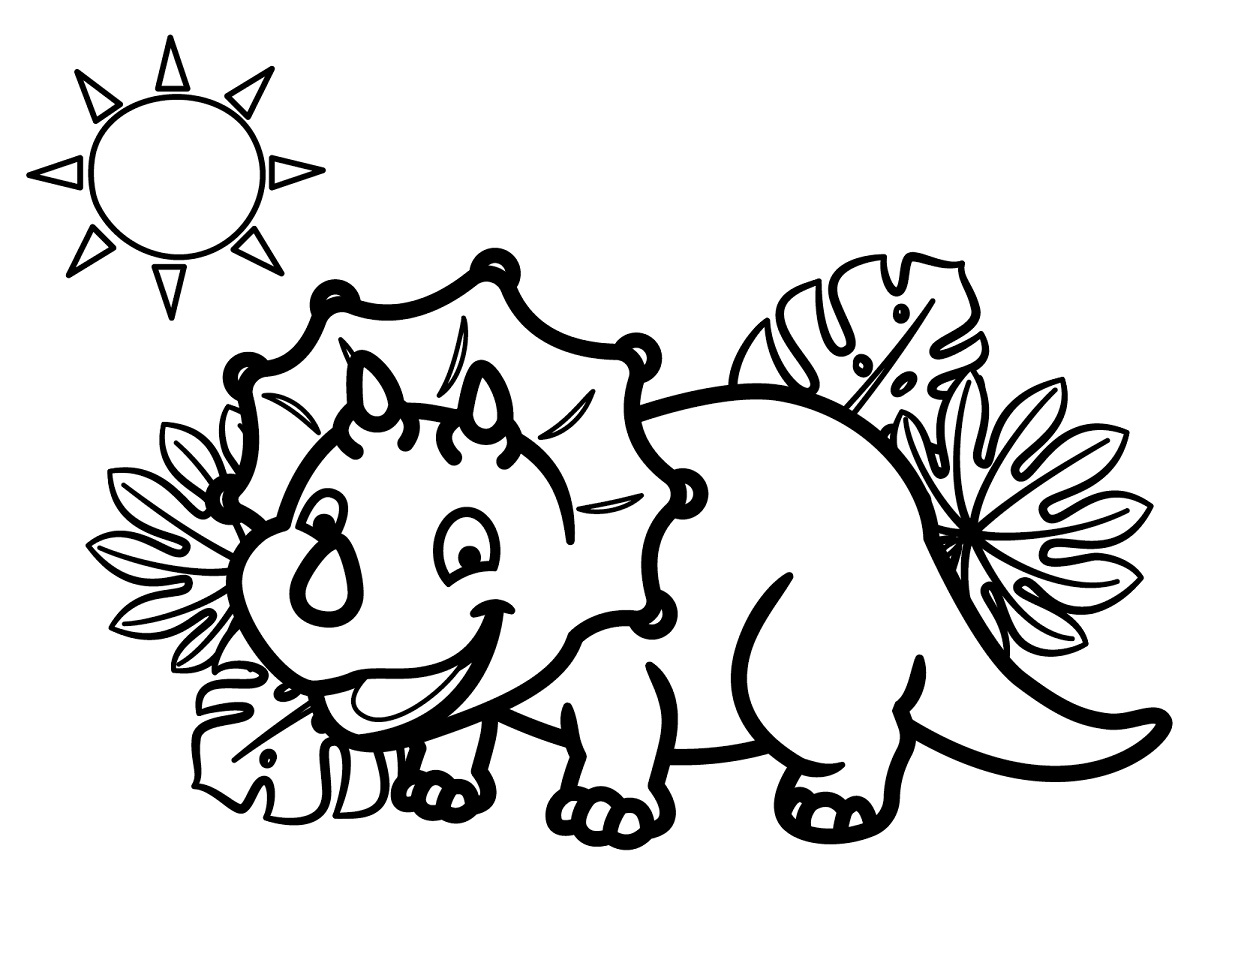 Stegosaurus Coloring Page & coloring book. 6000+ coloring pages.